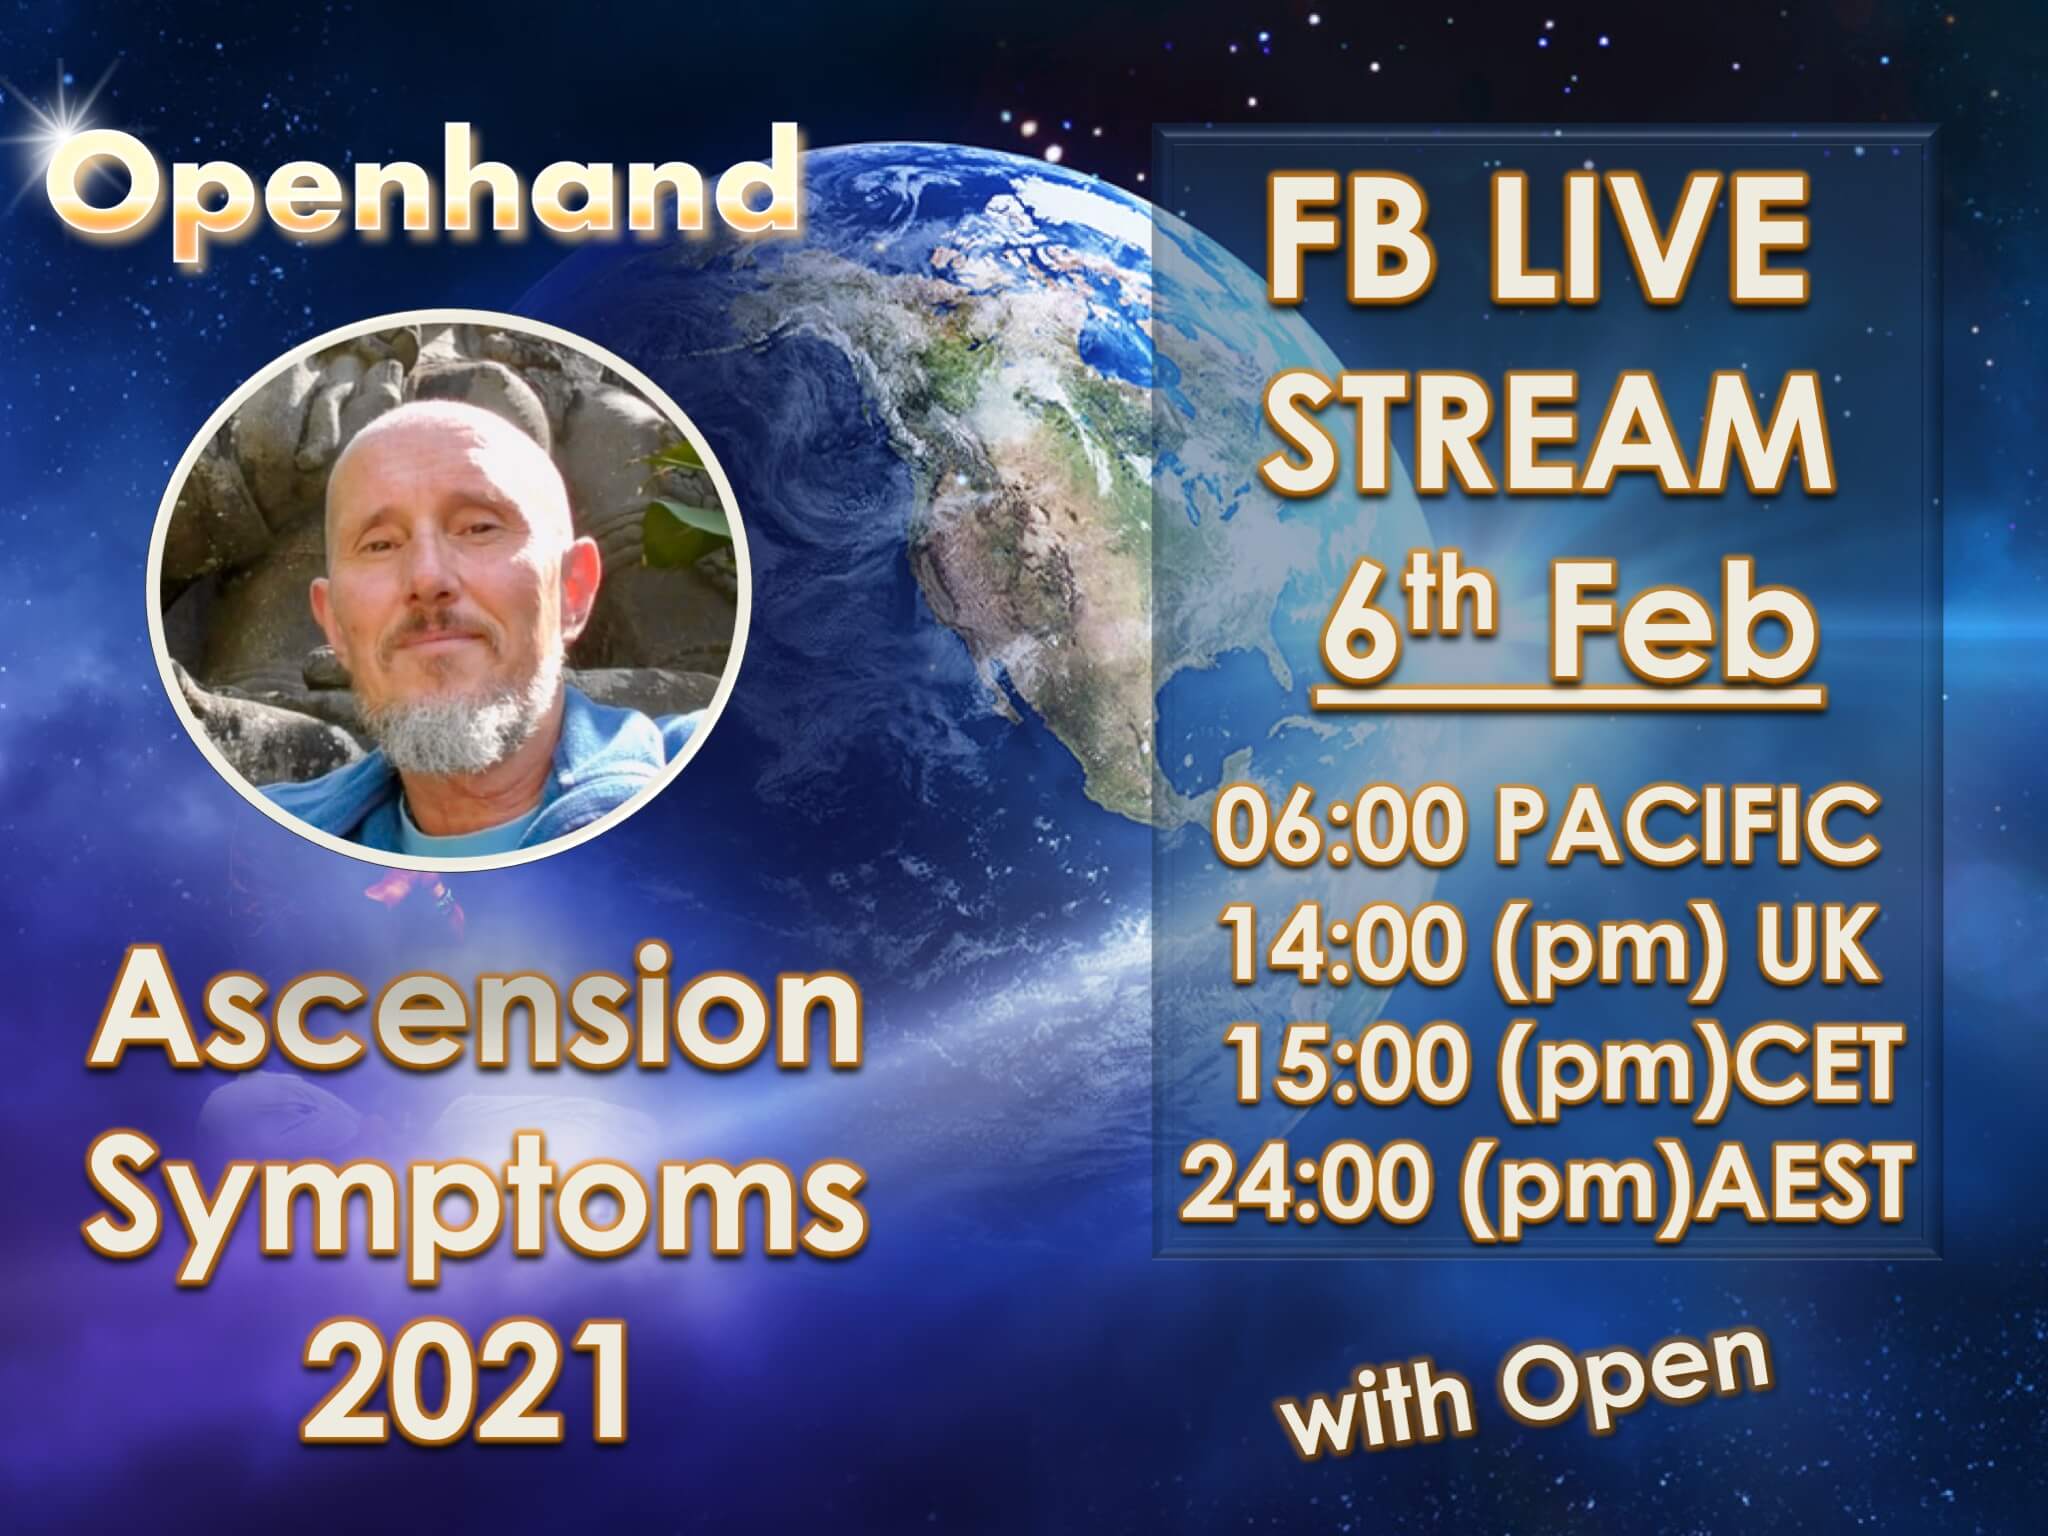 Ascension Symptoms LiveStream with Openhand